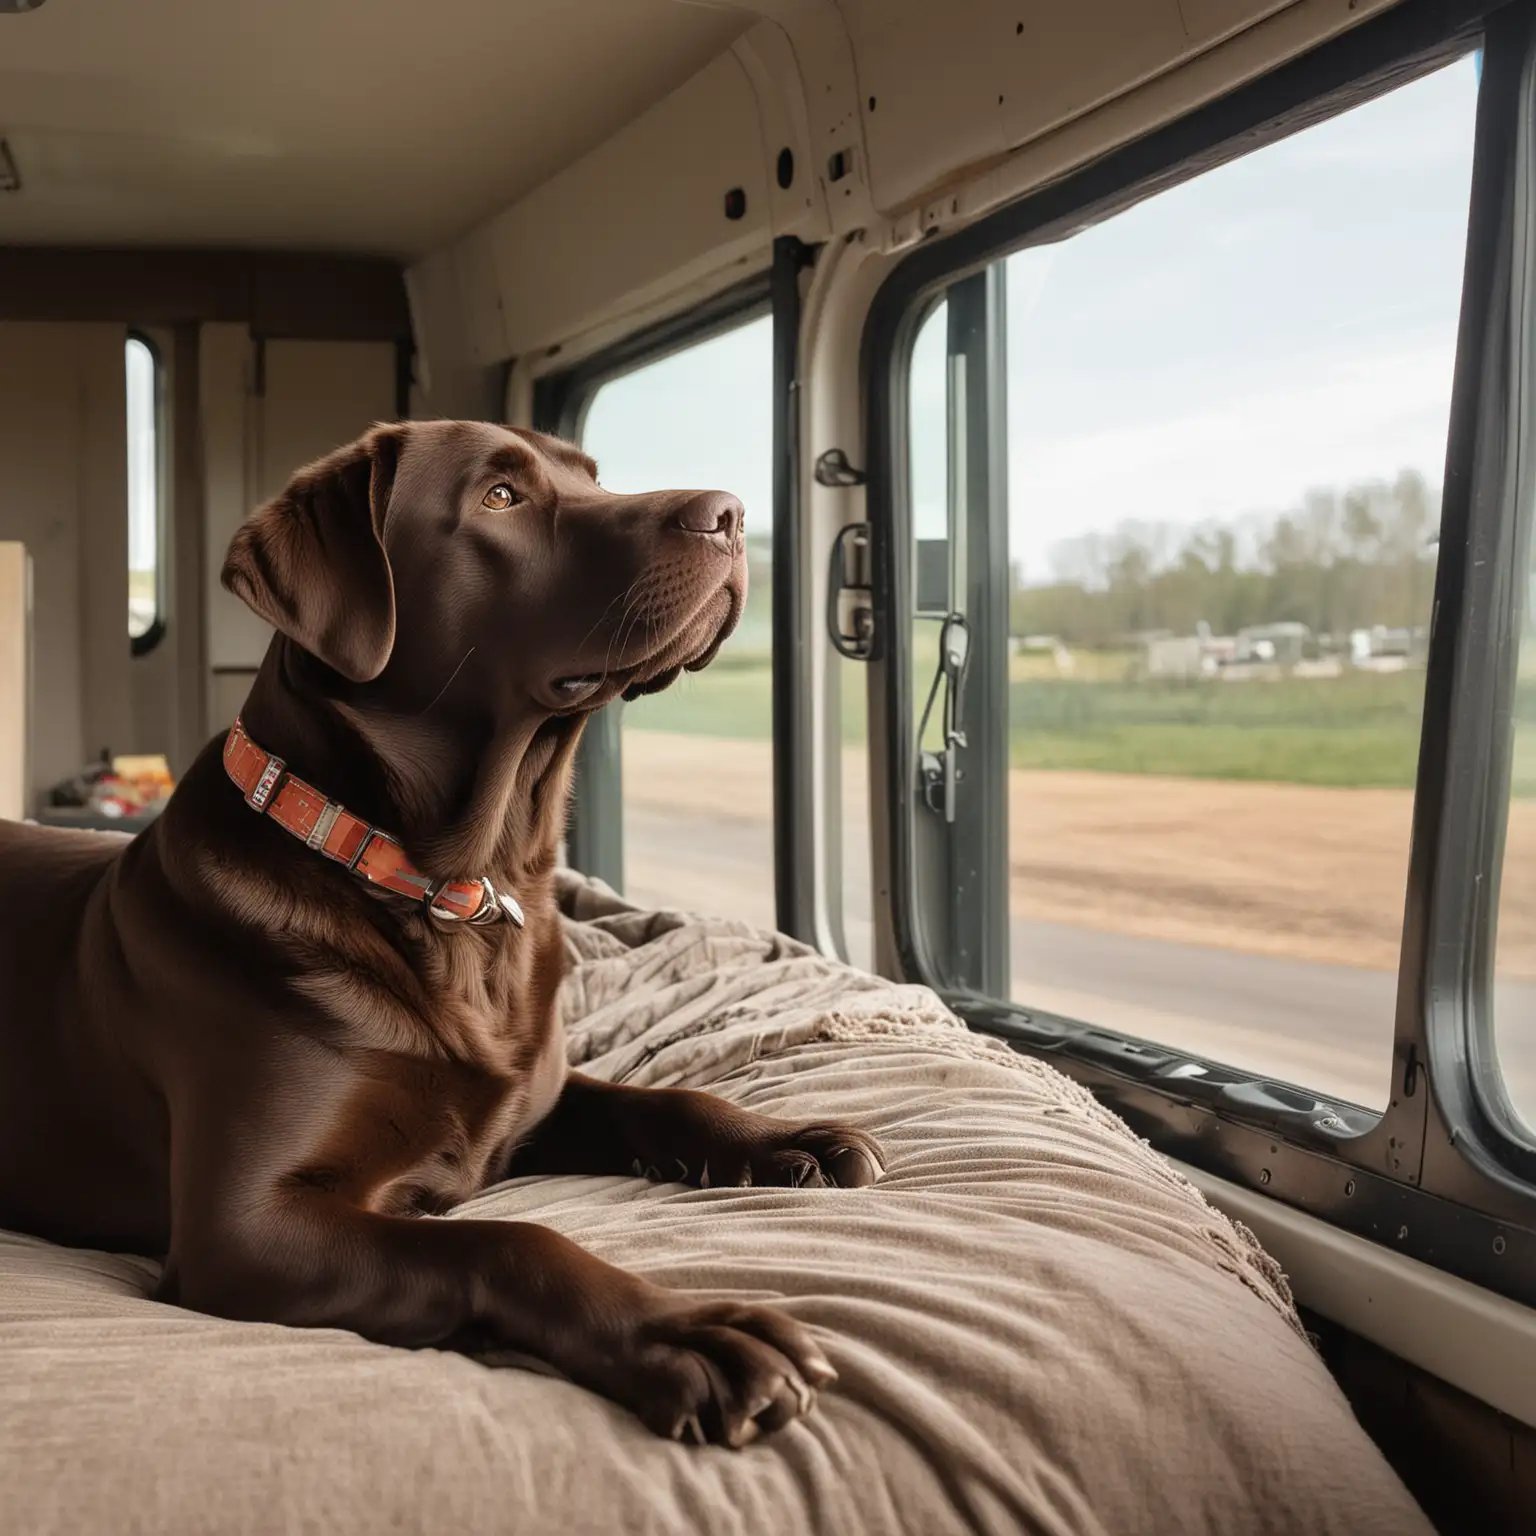 Chocolate Labrador Retriever Relaxing on Bed in New Tractor Trailer Cabin